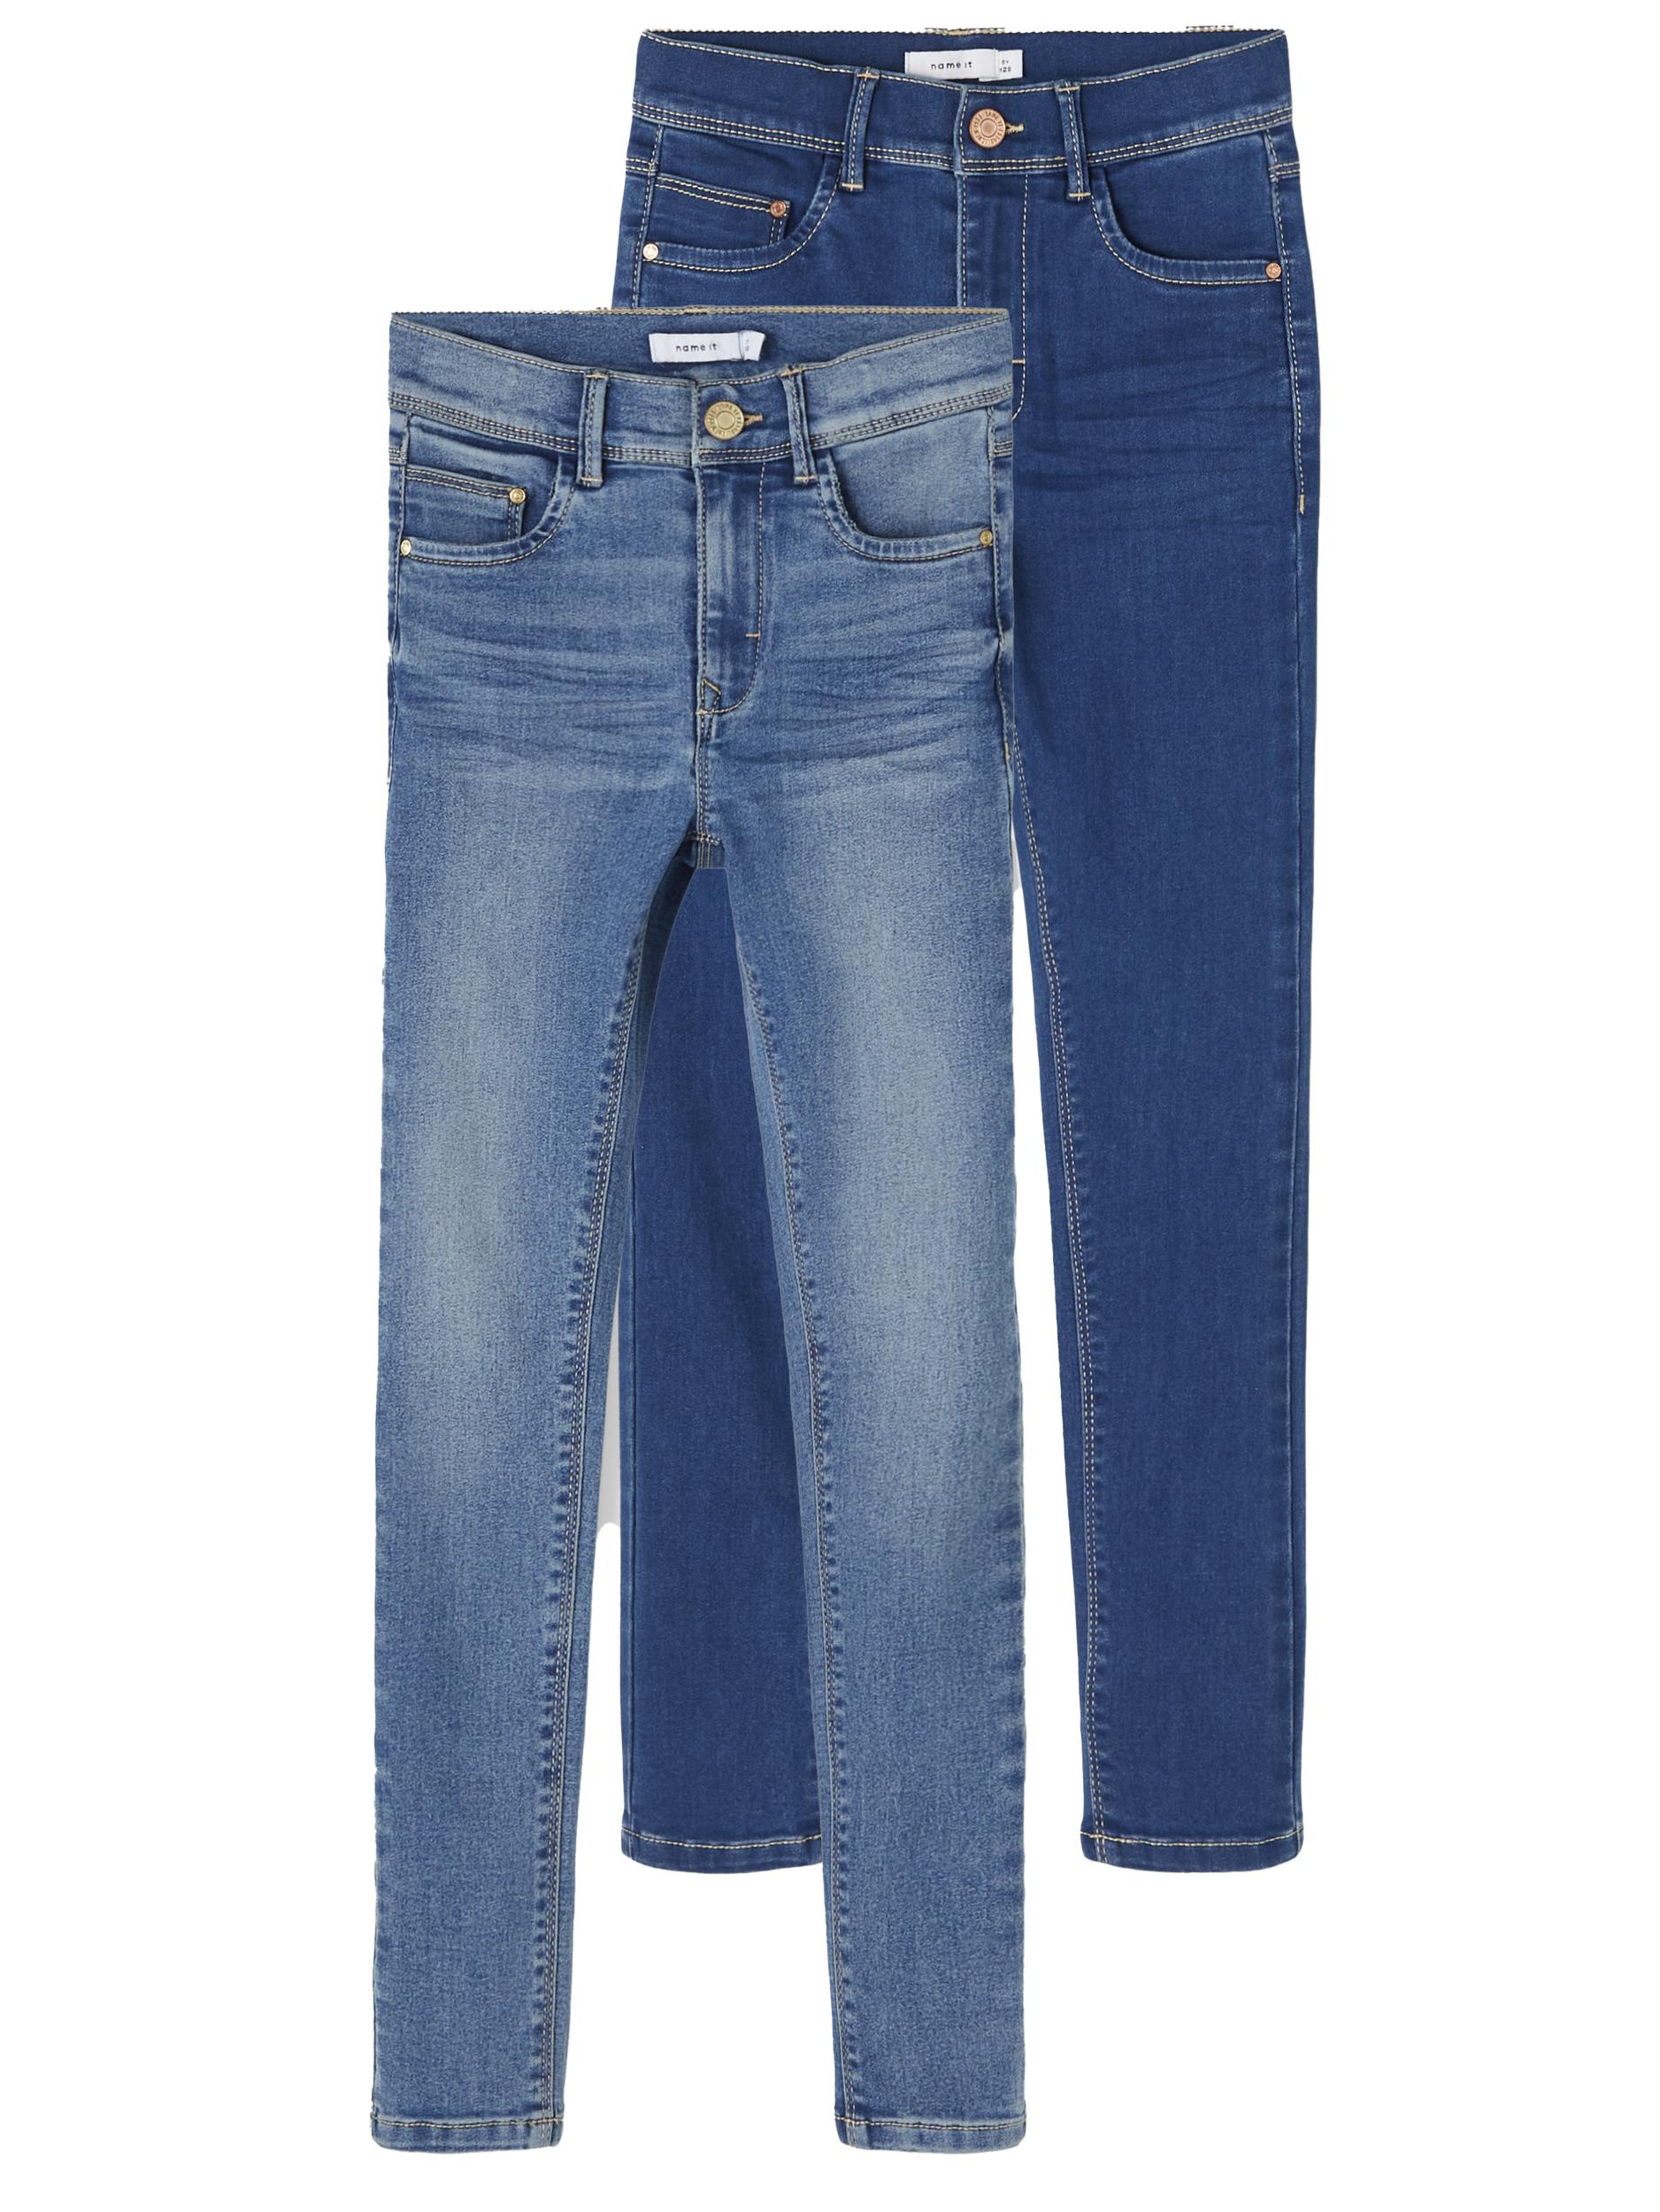 KKrnH Bambini NAME IT Jeans Polly in Blu Scuro 